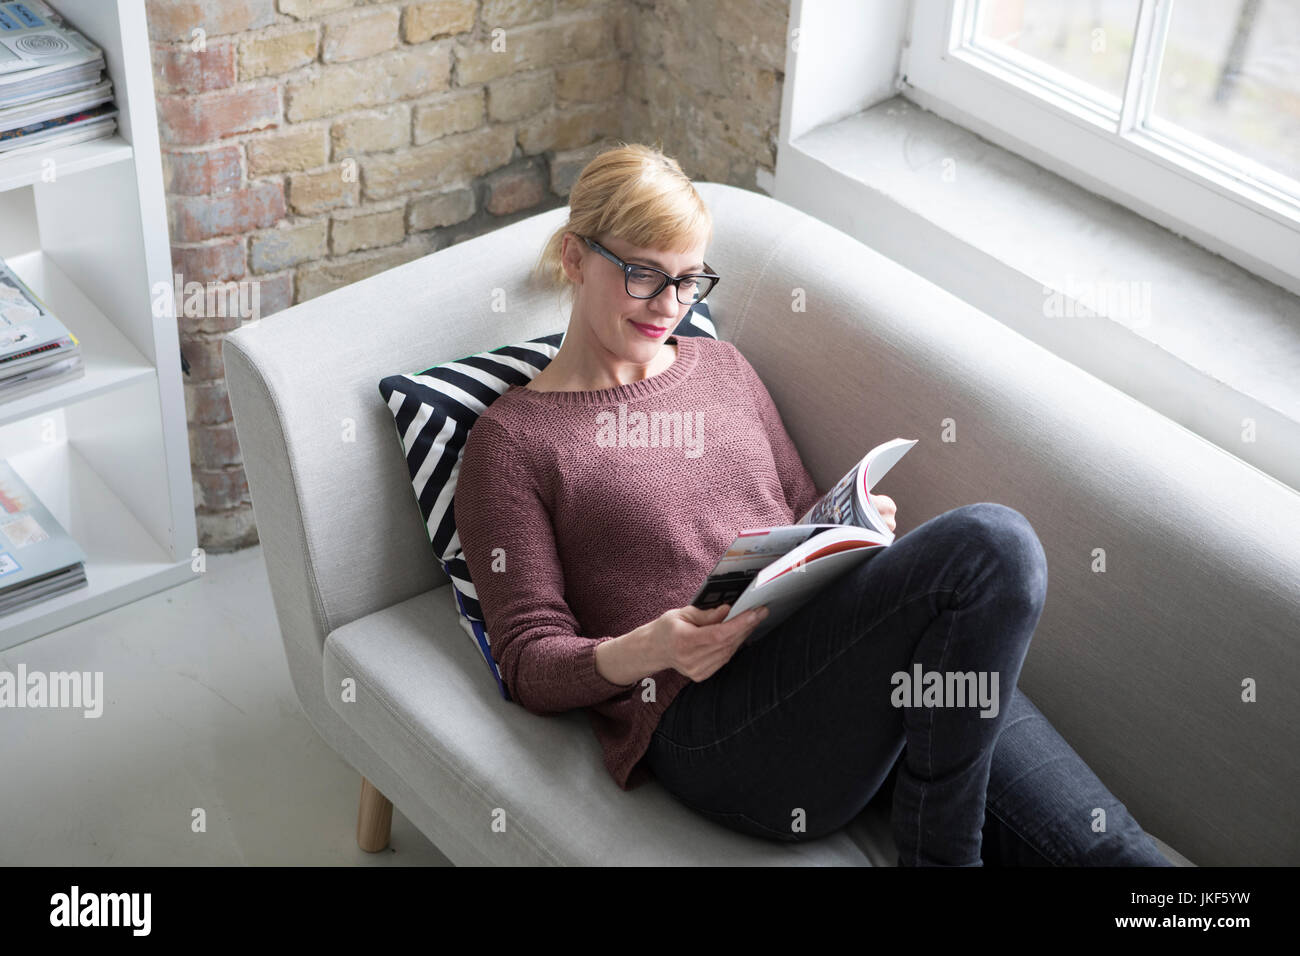 Woman sitting on couch, reading book Banque D'Images